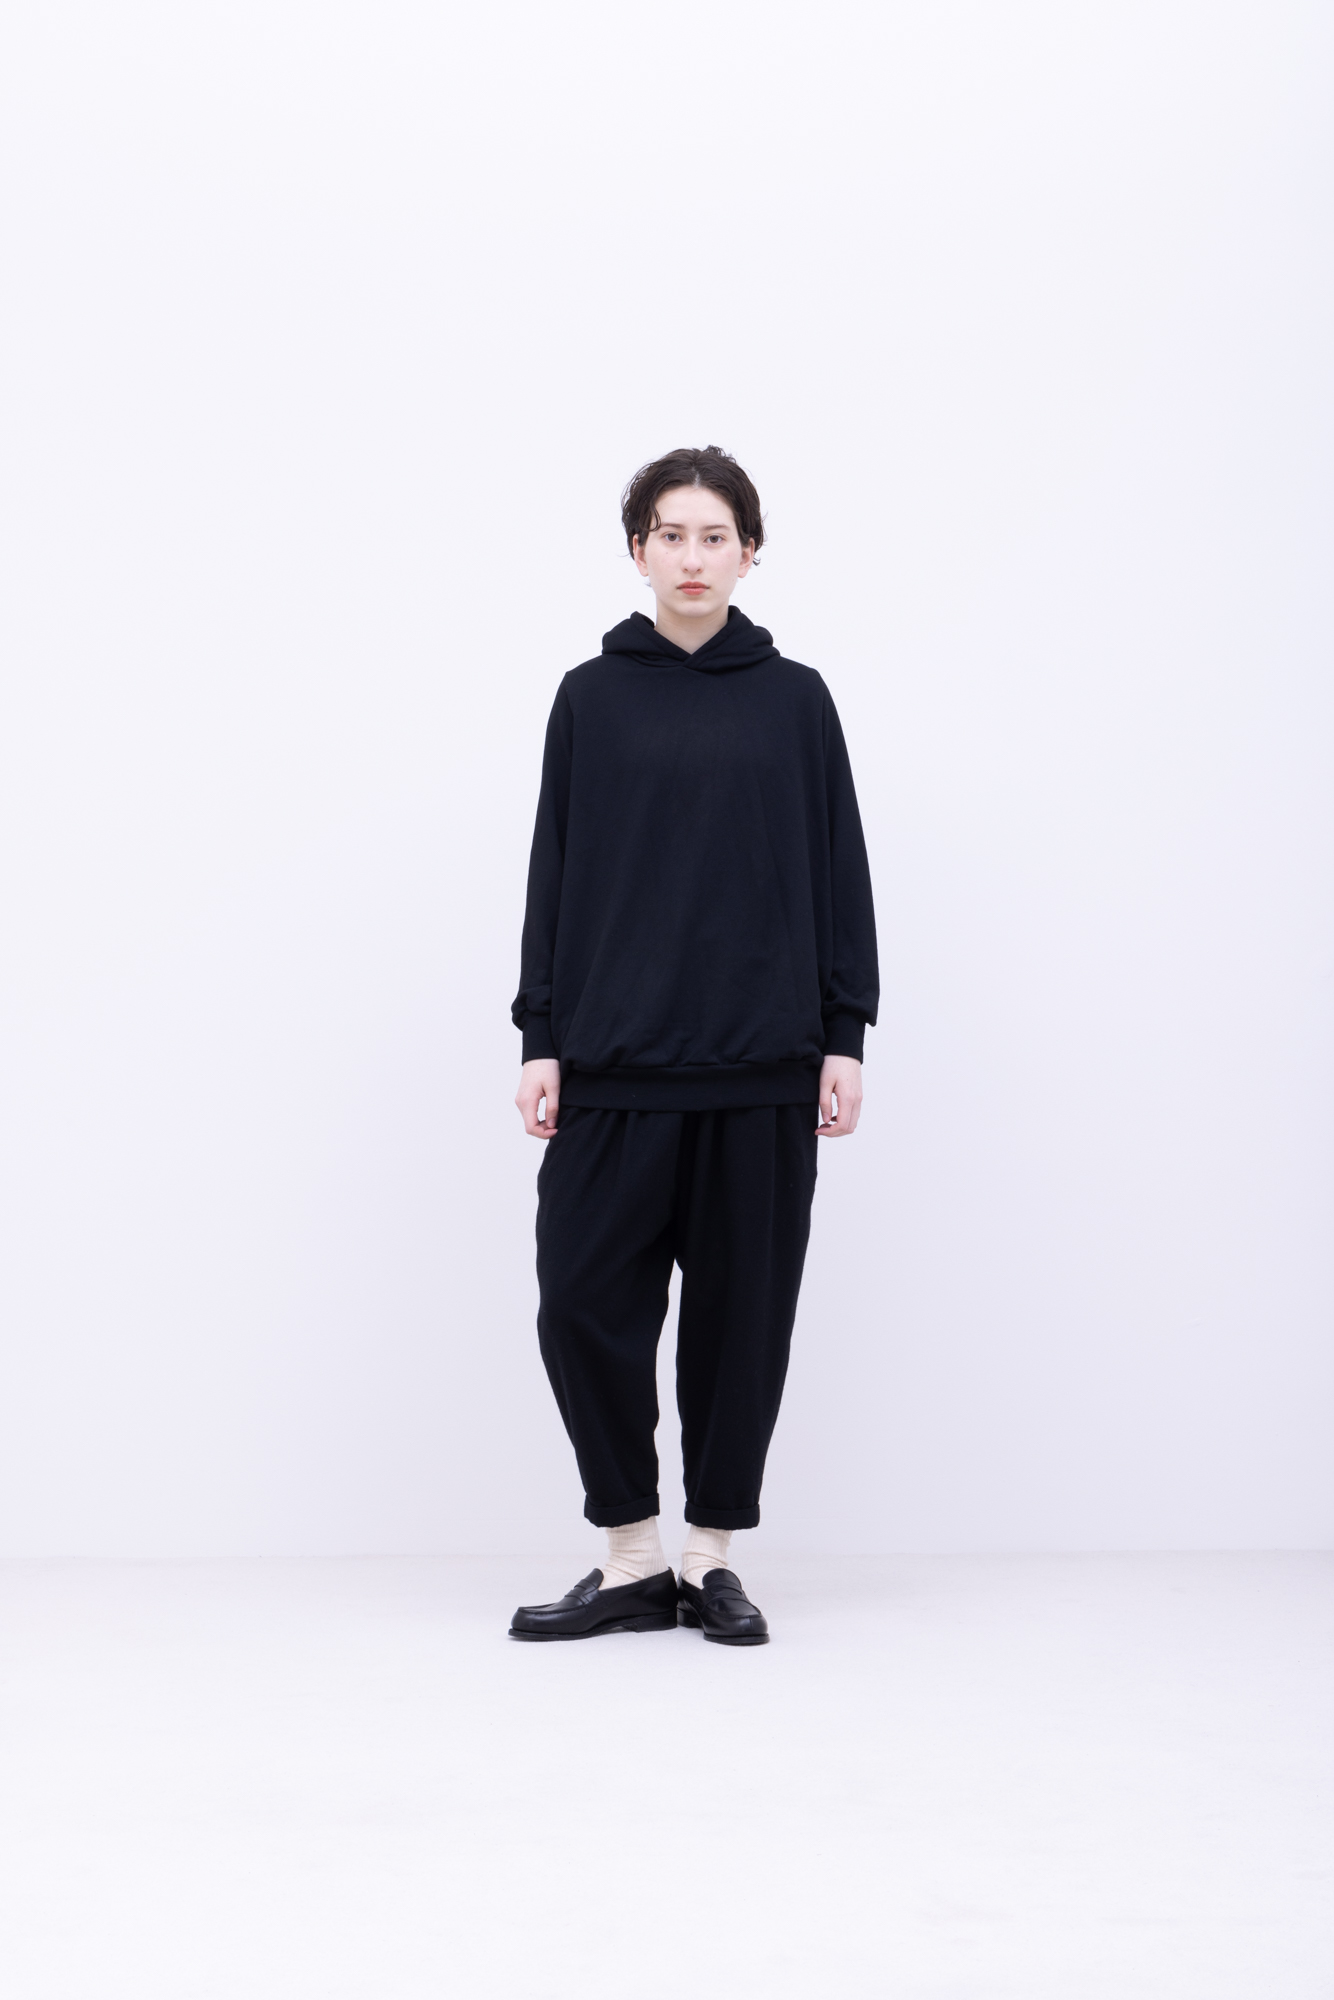 No. 048 | 2023 AW WOMENS / Model H=169cm | LOOK | FIRMUM